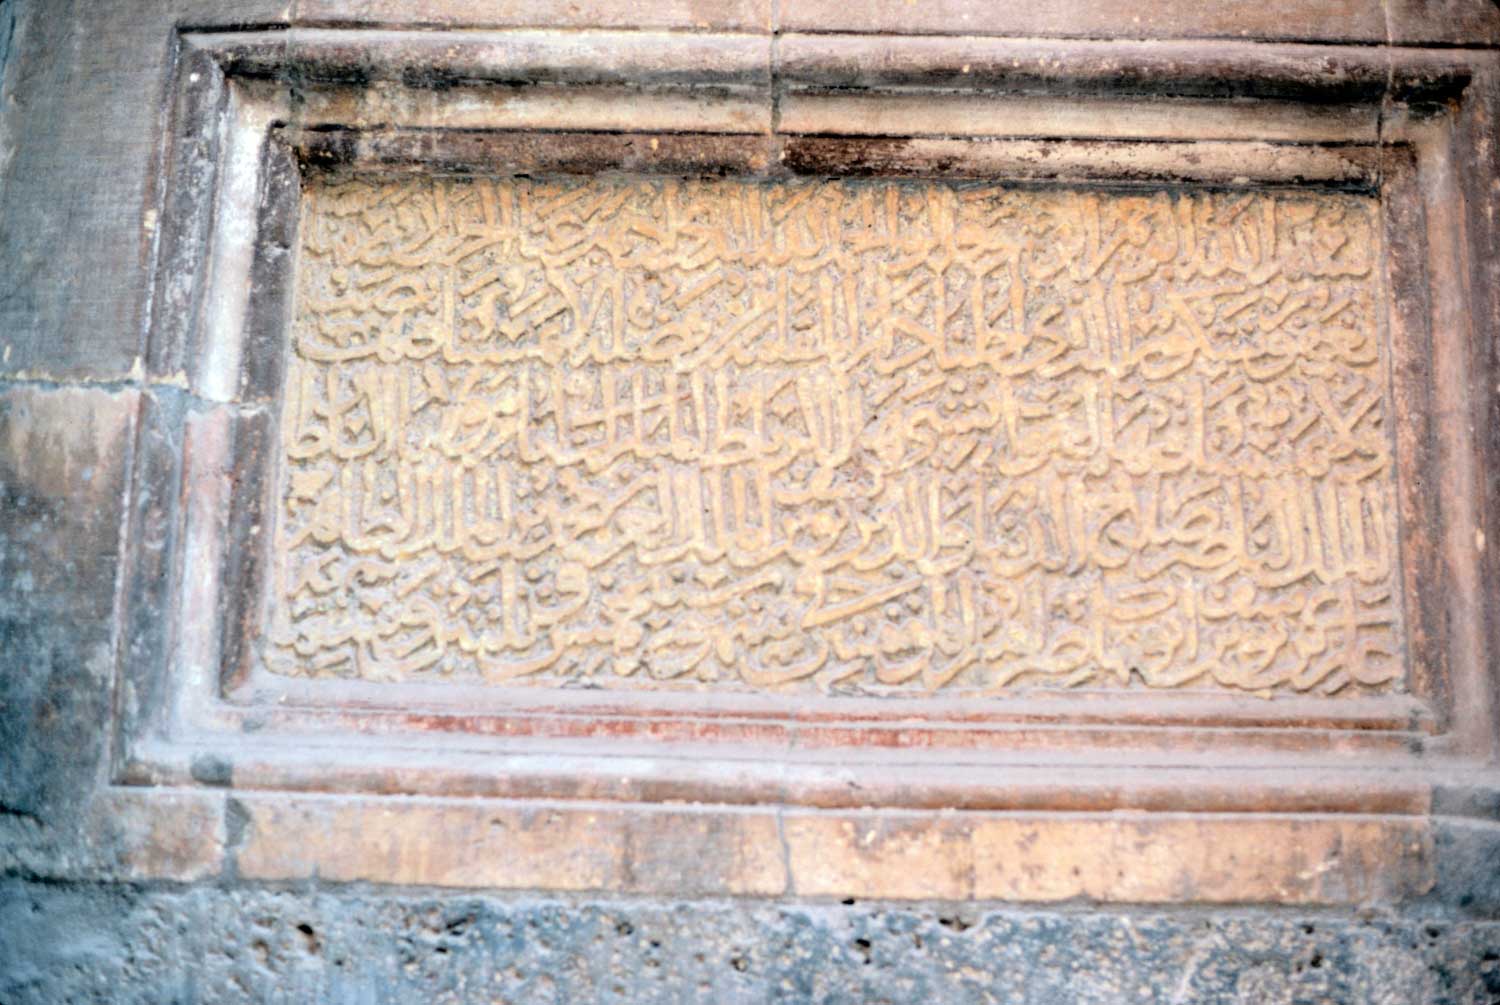 Detail of an inscription panel above an entrance